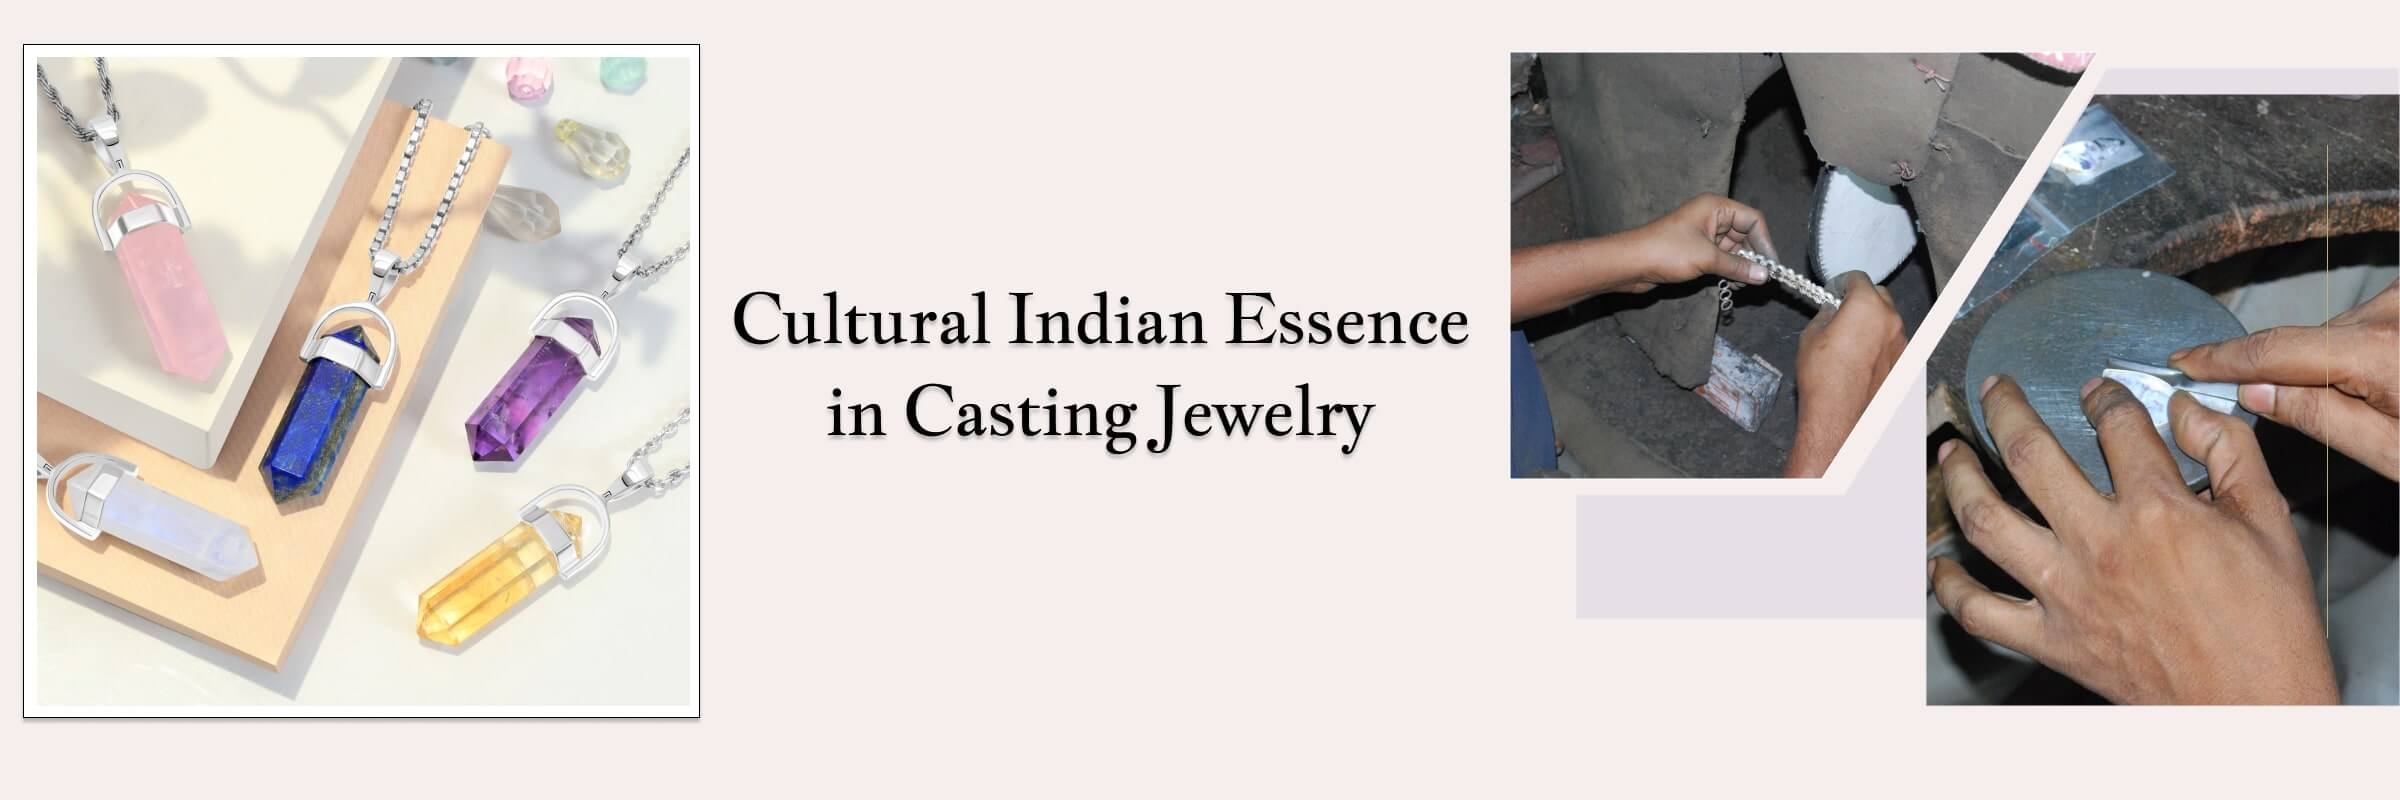 What Can We Get By Cooperating Indian Casting Jewellery